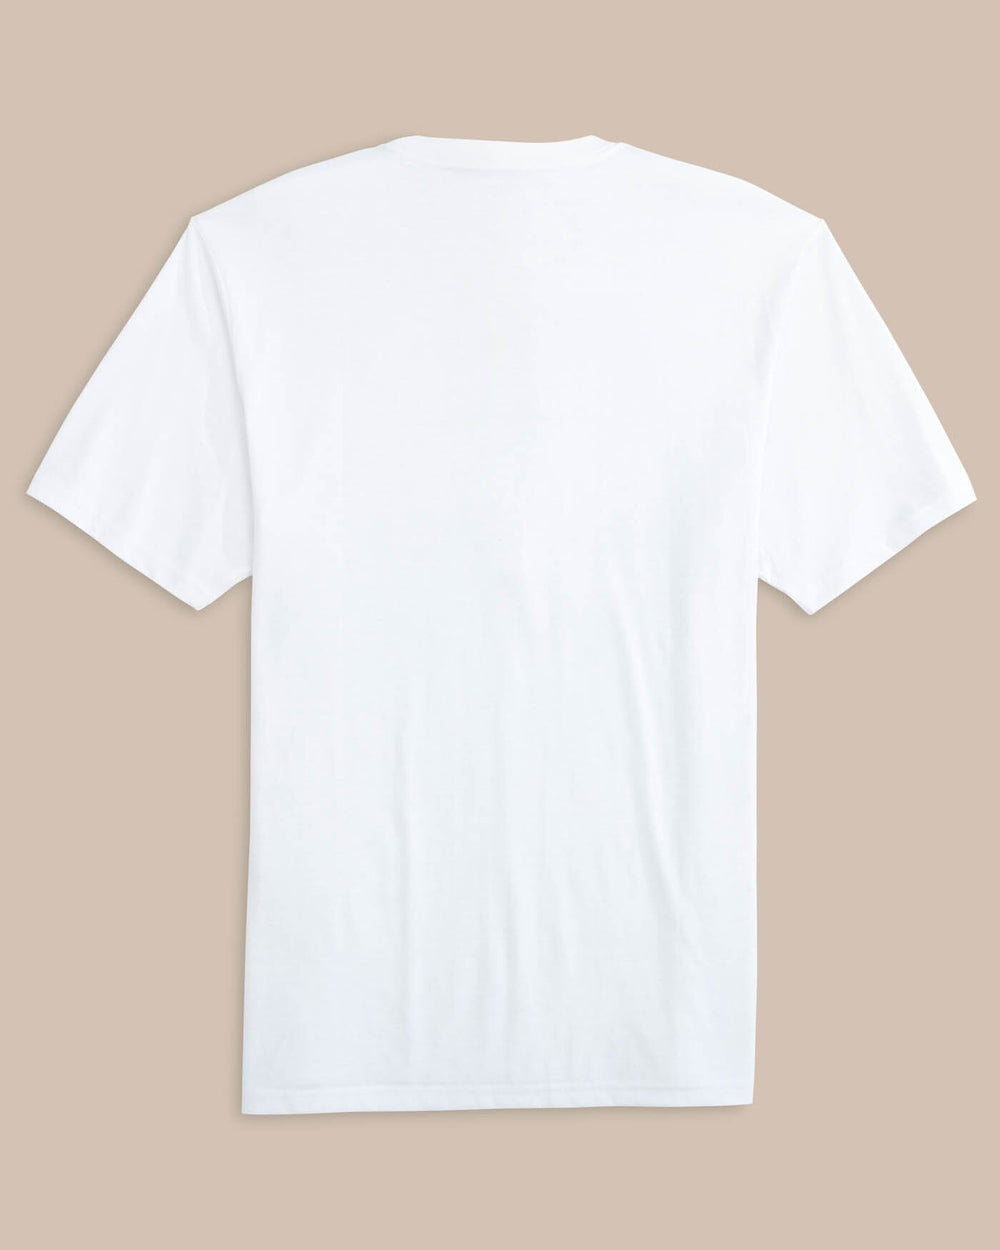 The back view of the Southern Tide Skipjack Honeycomb Front Graphic Short Sleeve T-shirt by Southern Tide - Classic White